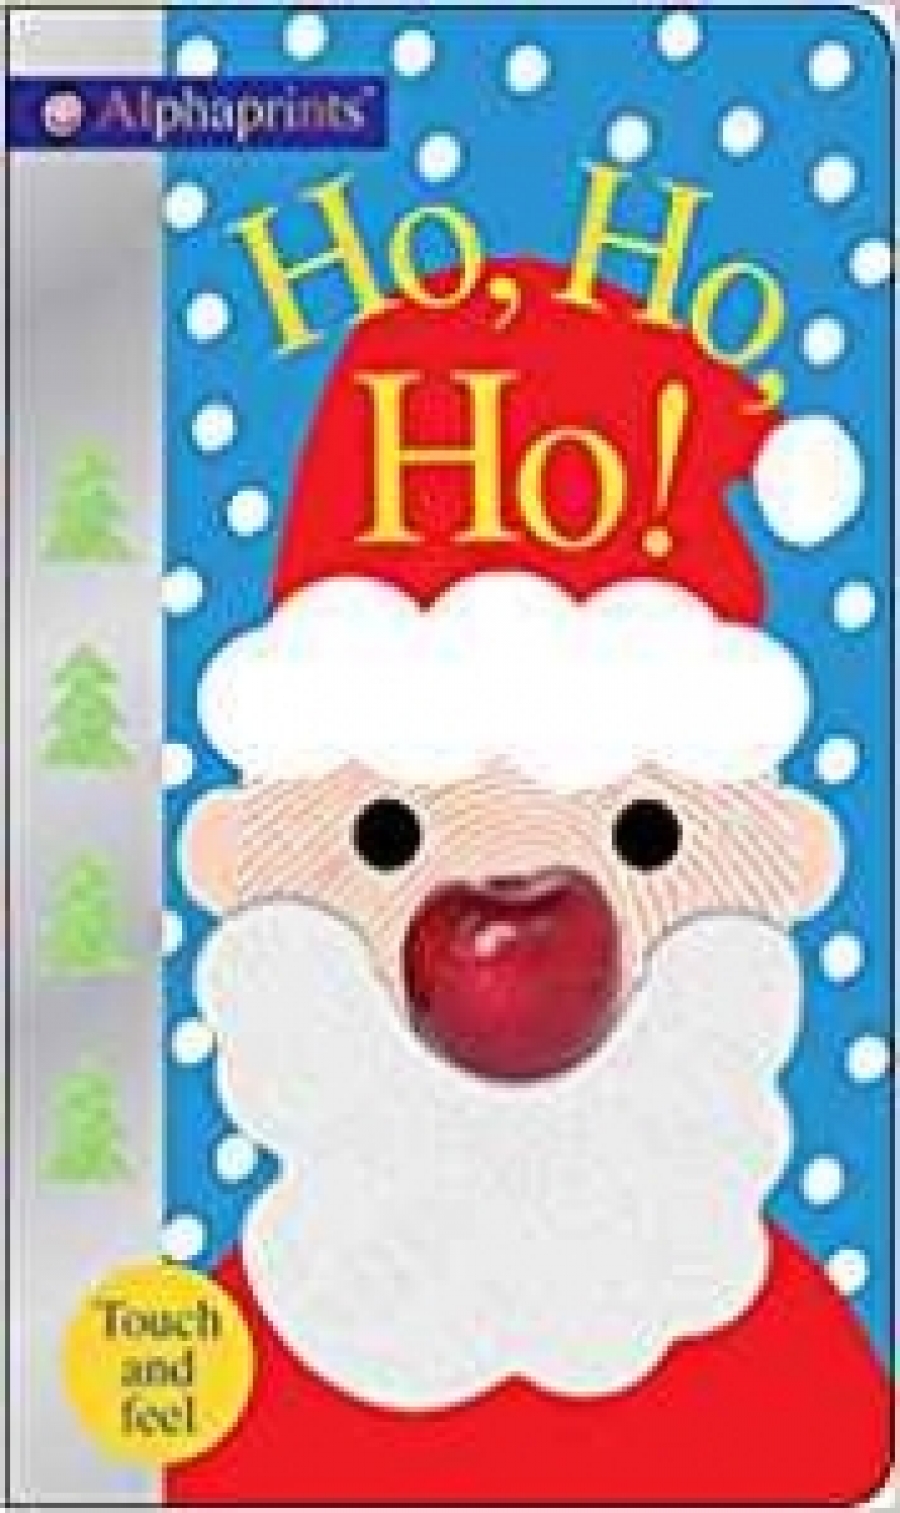 Priddy Roger Alphaprints: Ho, Ho, Ho!: A Touch-and-Feel Book. Board book 